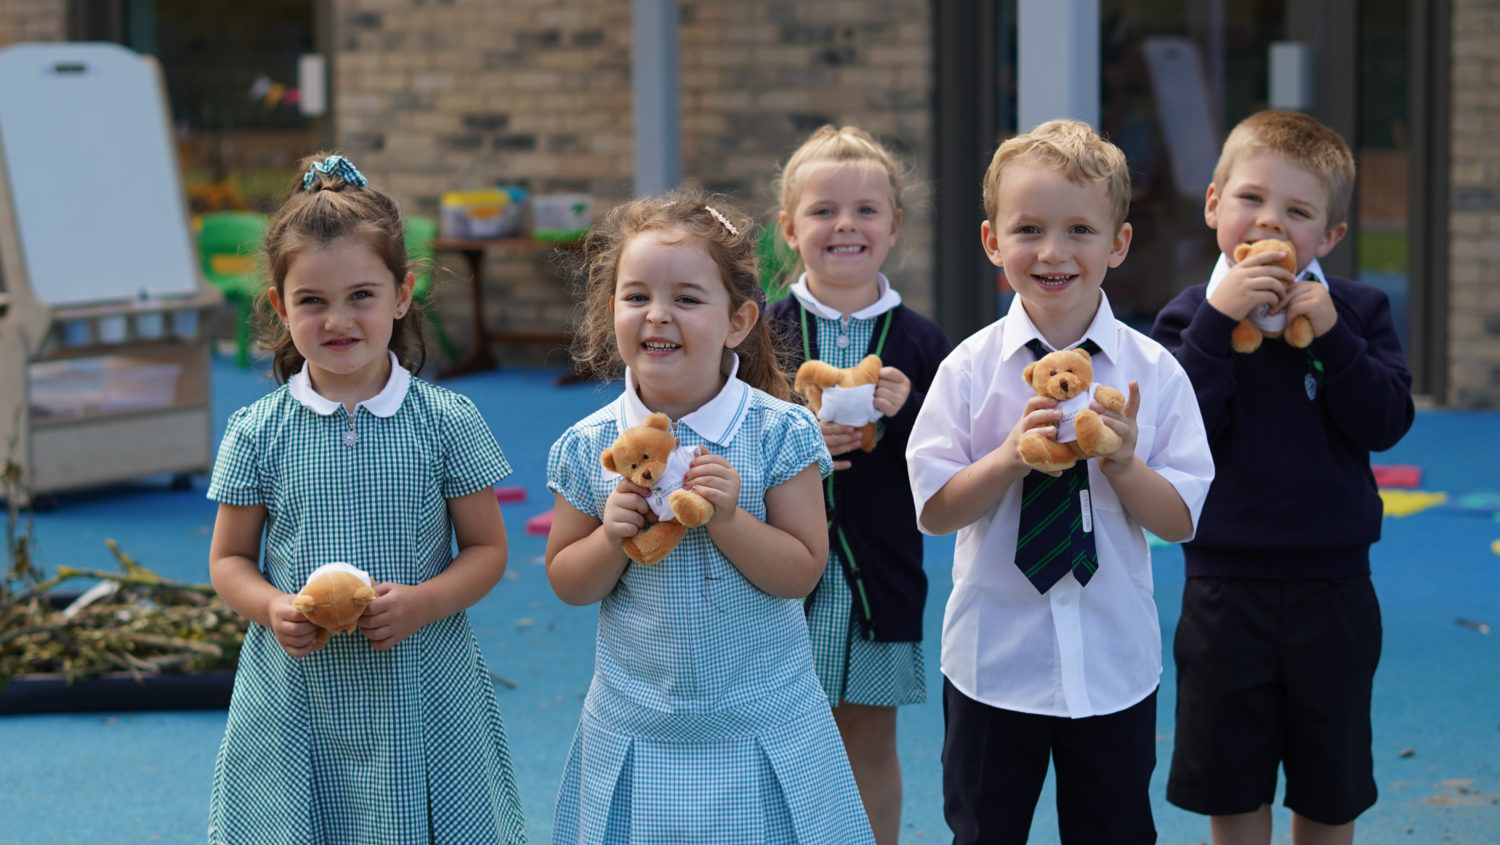 A group of children outside holding small teddy bears